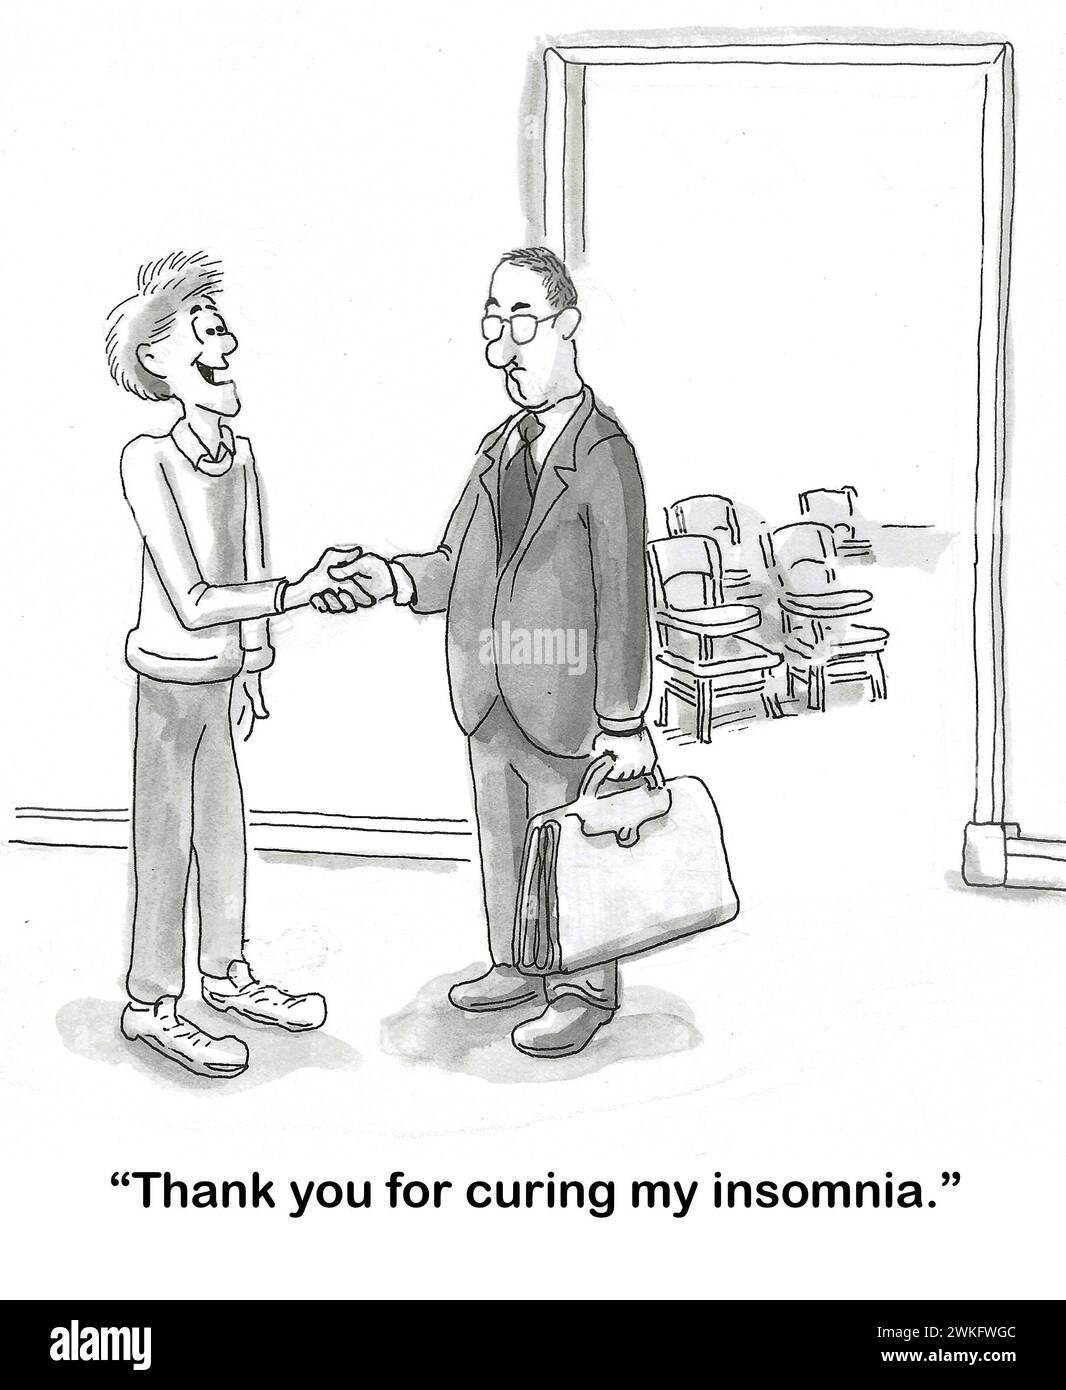 BW cartoon of a male student shaking the professor's hand while stating the male professor cured his insomnia. Stock Photo